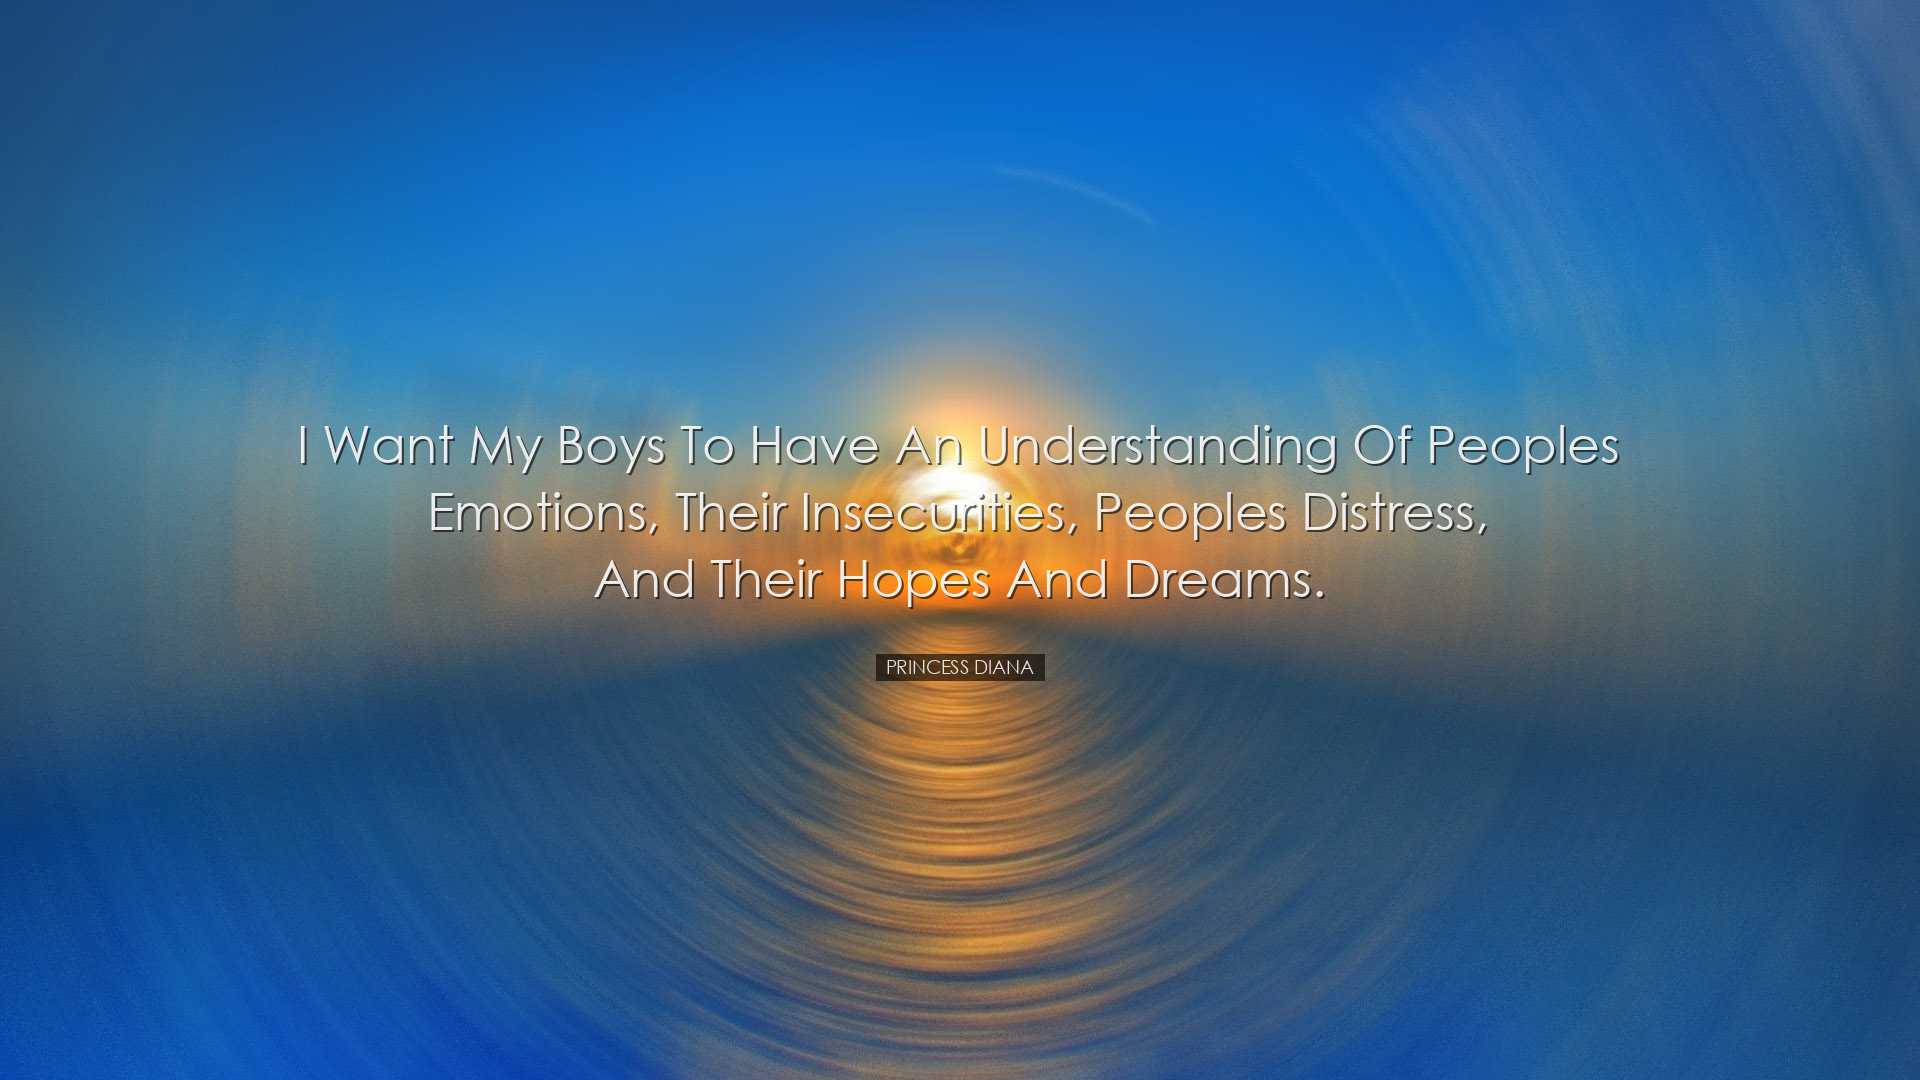 I want my boys to have an understanding of peoples emotions, their